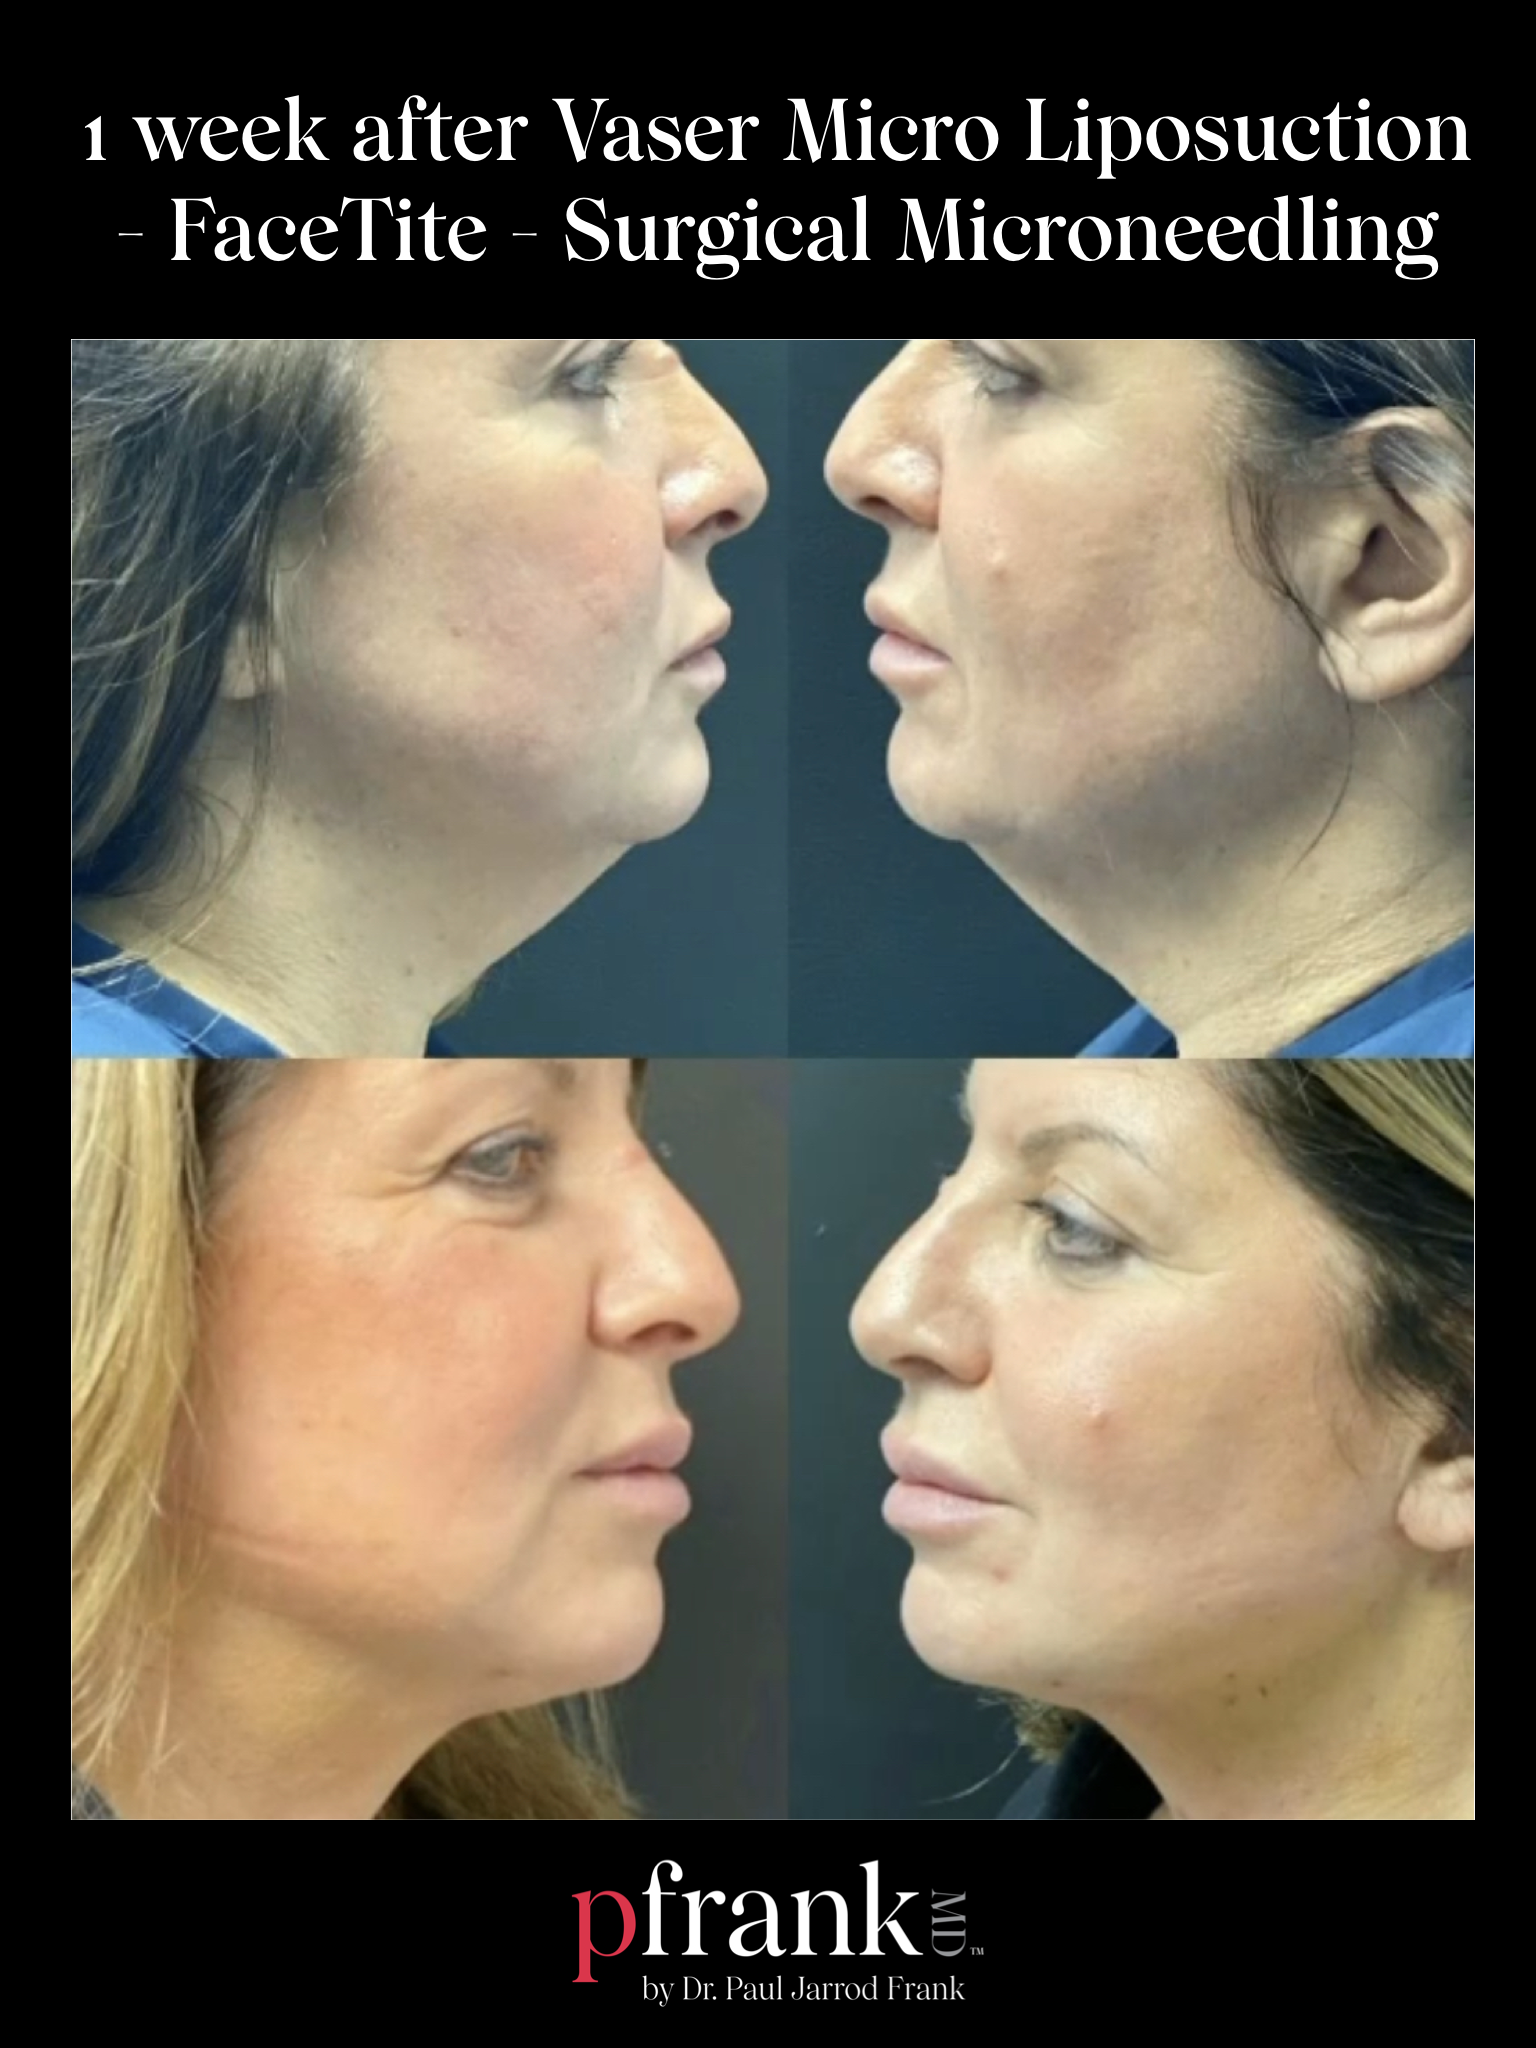 Vaser Micro Liposuction Facetite Surgical Microneedling Before and After Results